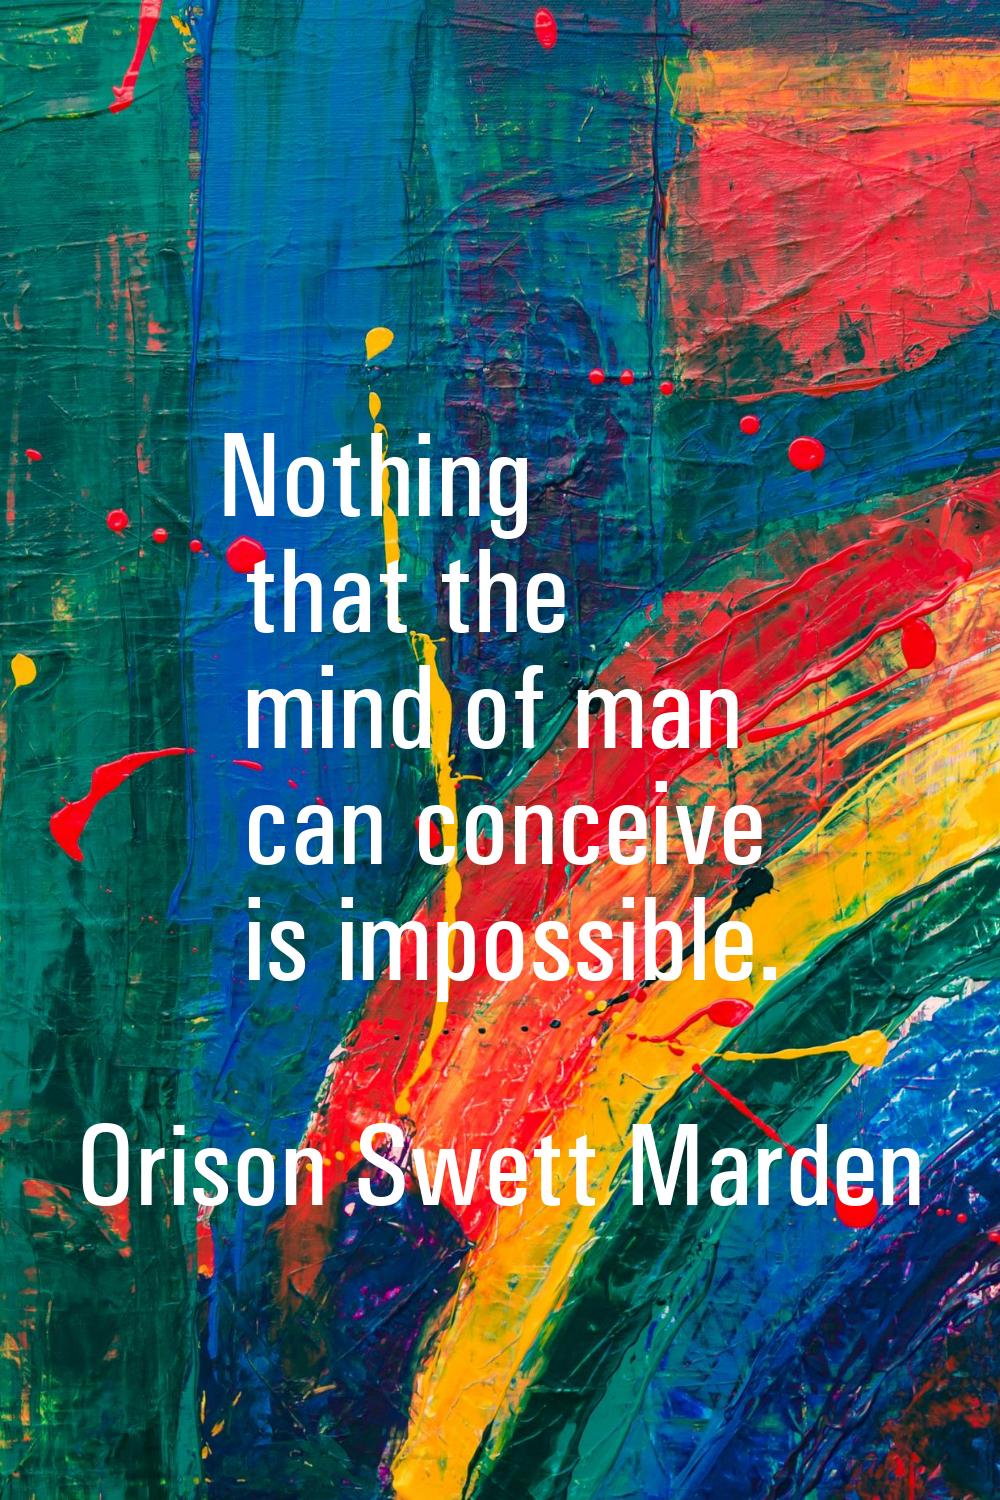 Nothing that the mind of man can conceive is impossible.